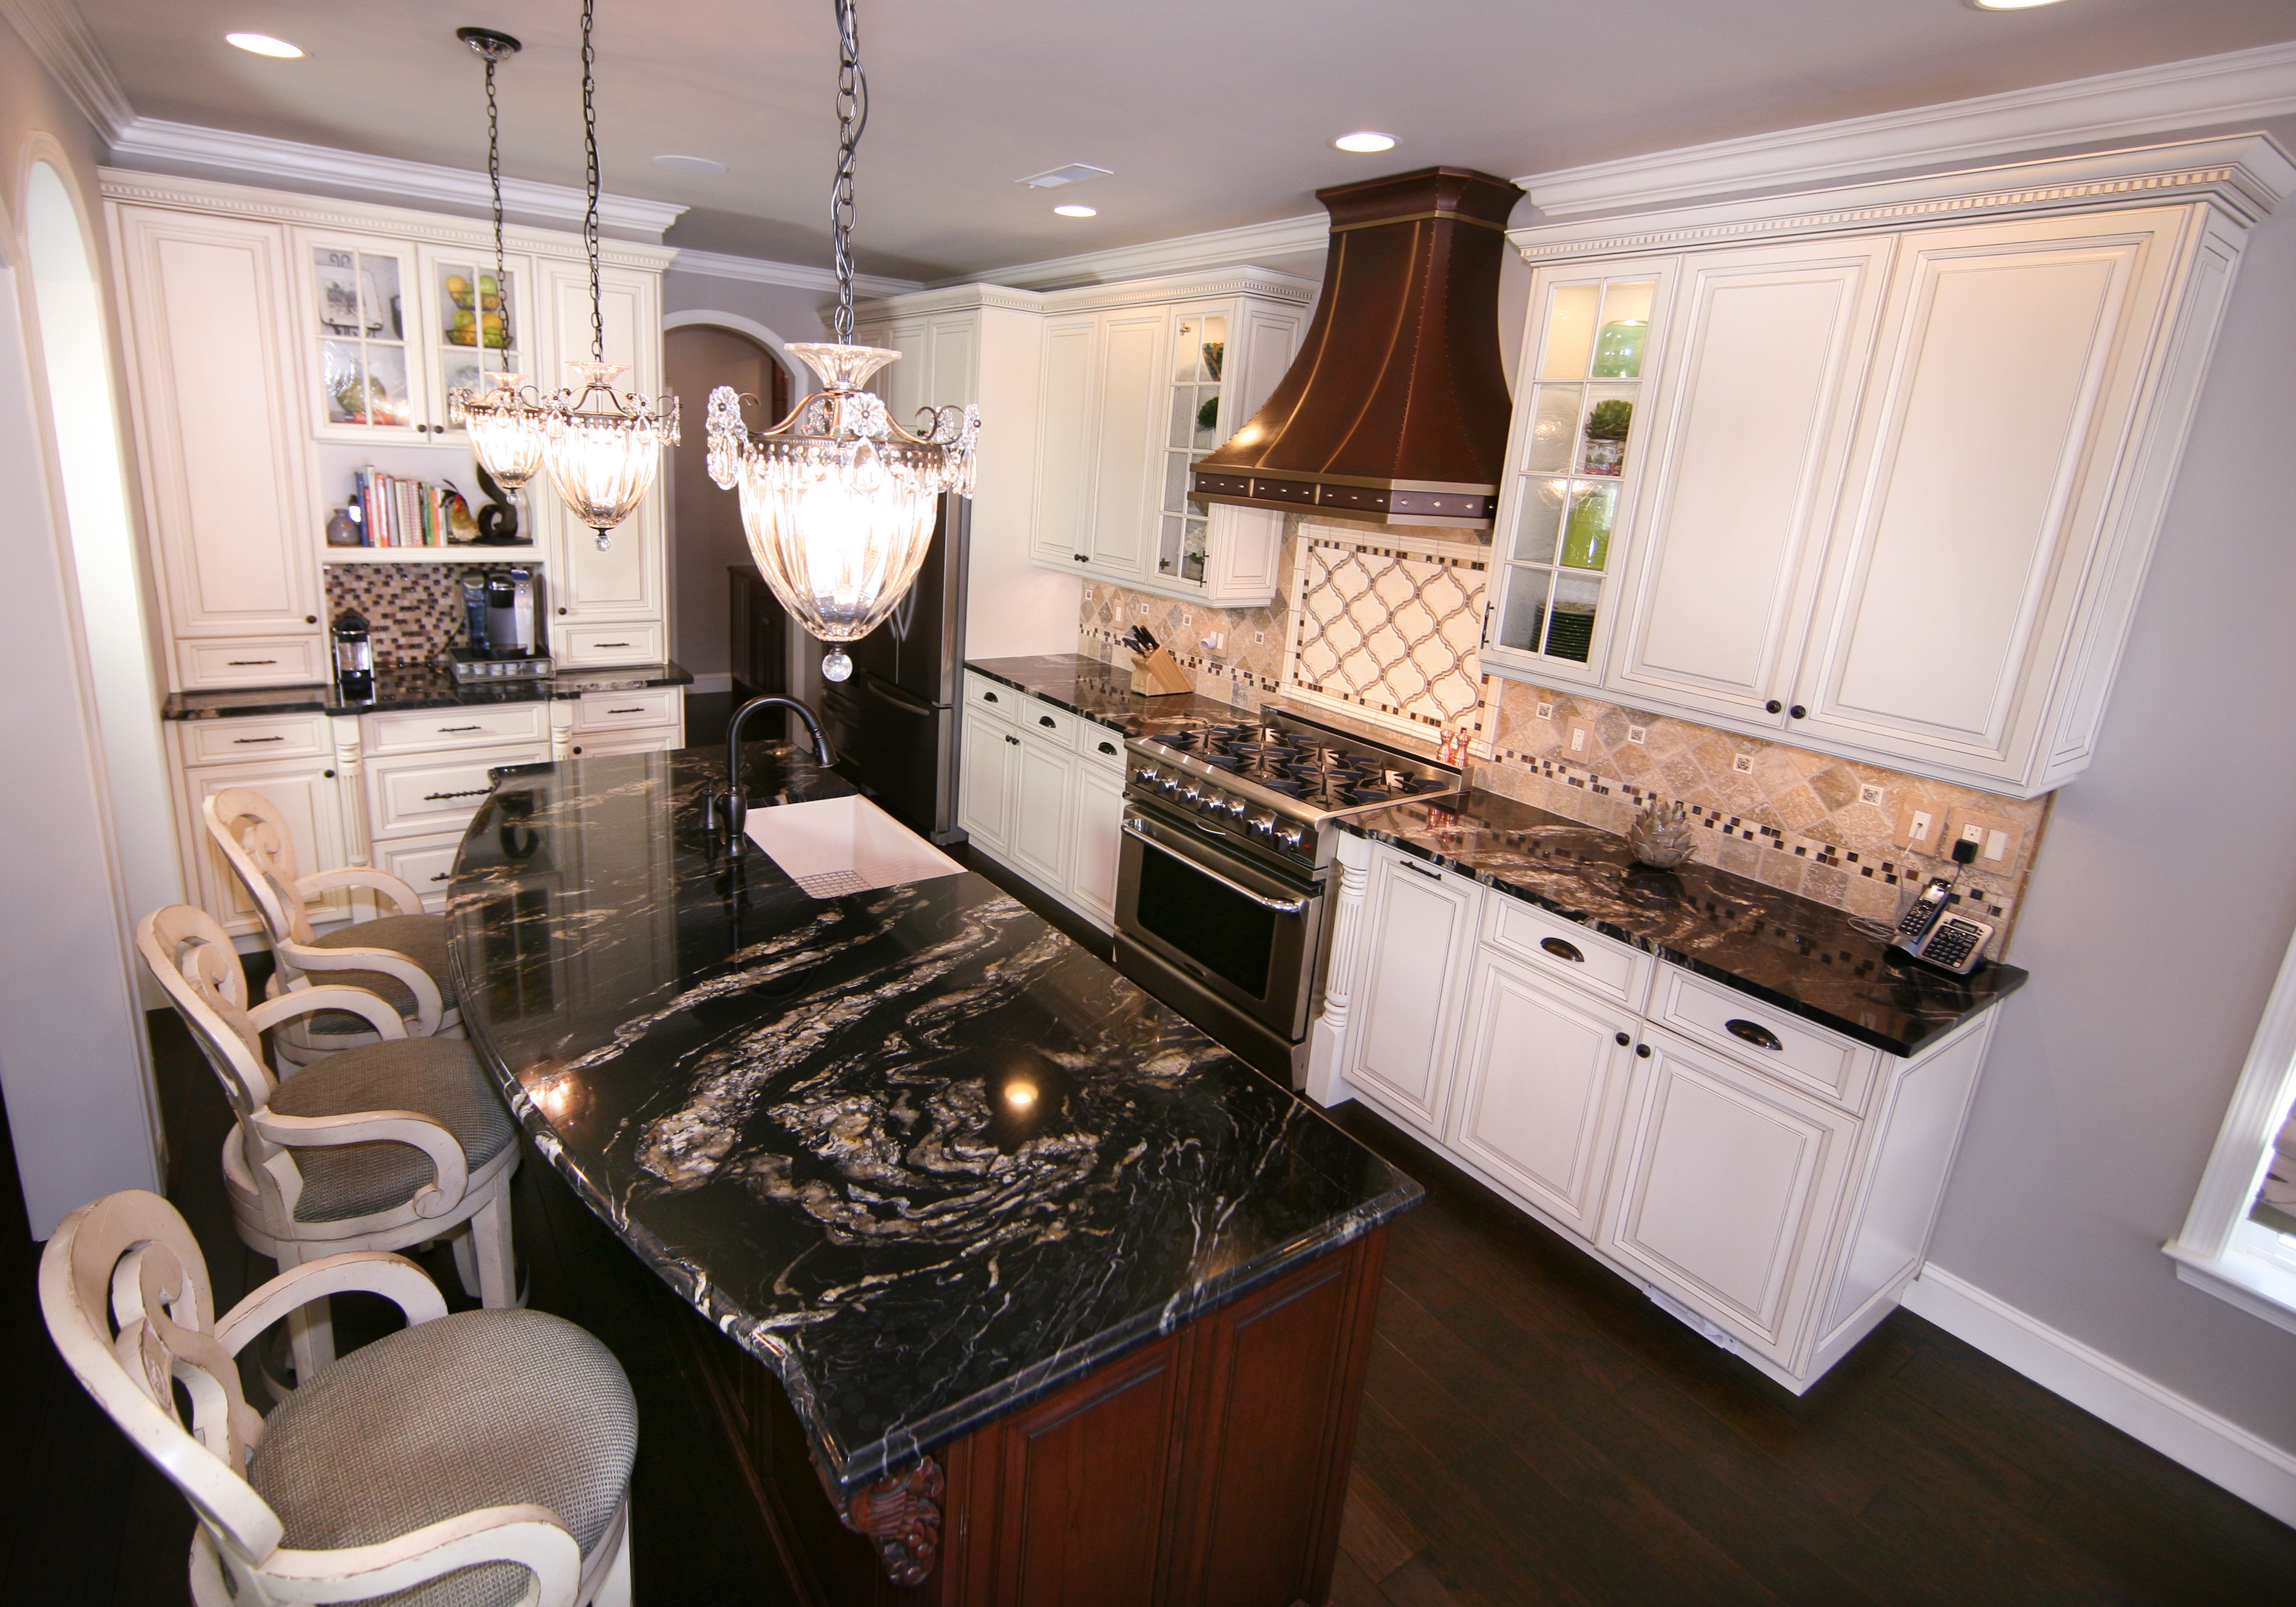 Top Rated Kitchen Farmingdale New Jersey by Design Line Kitchens